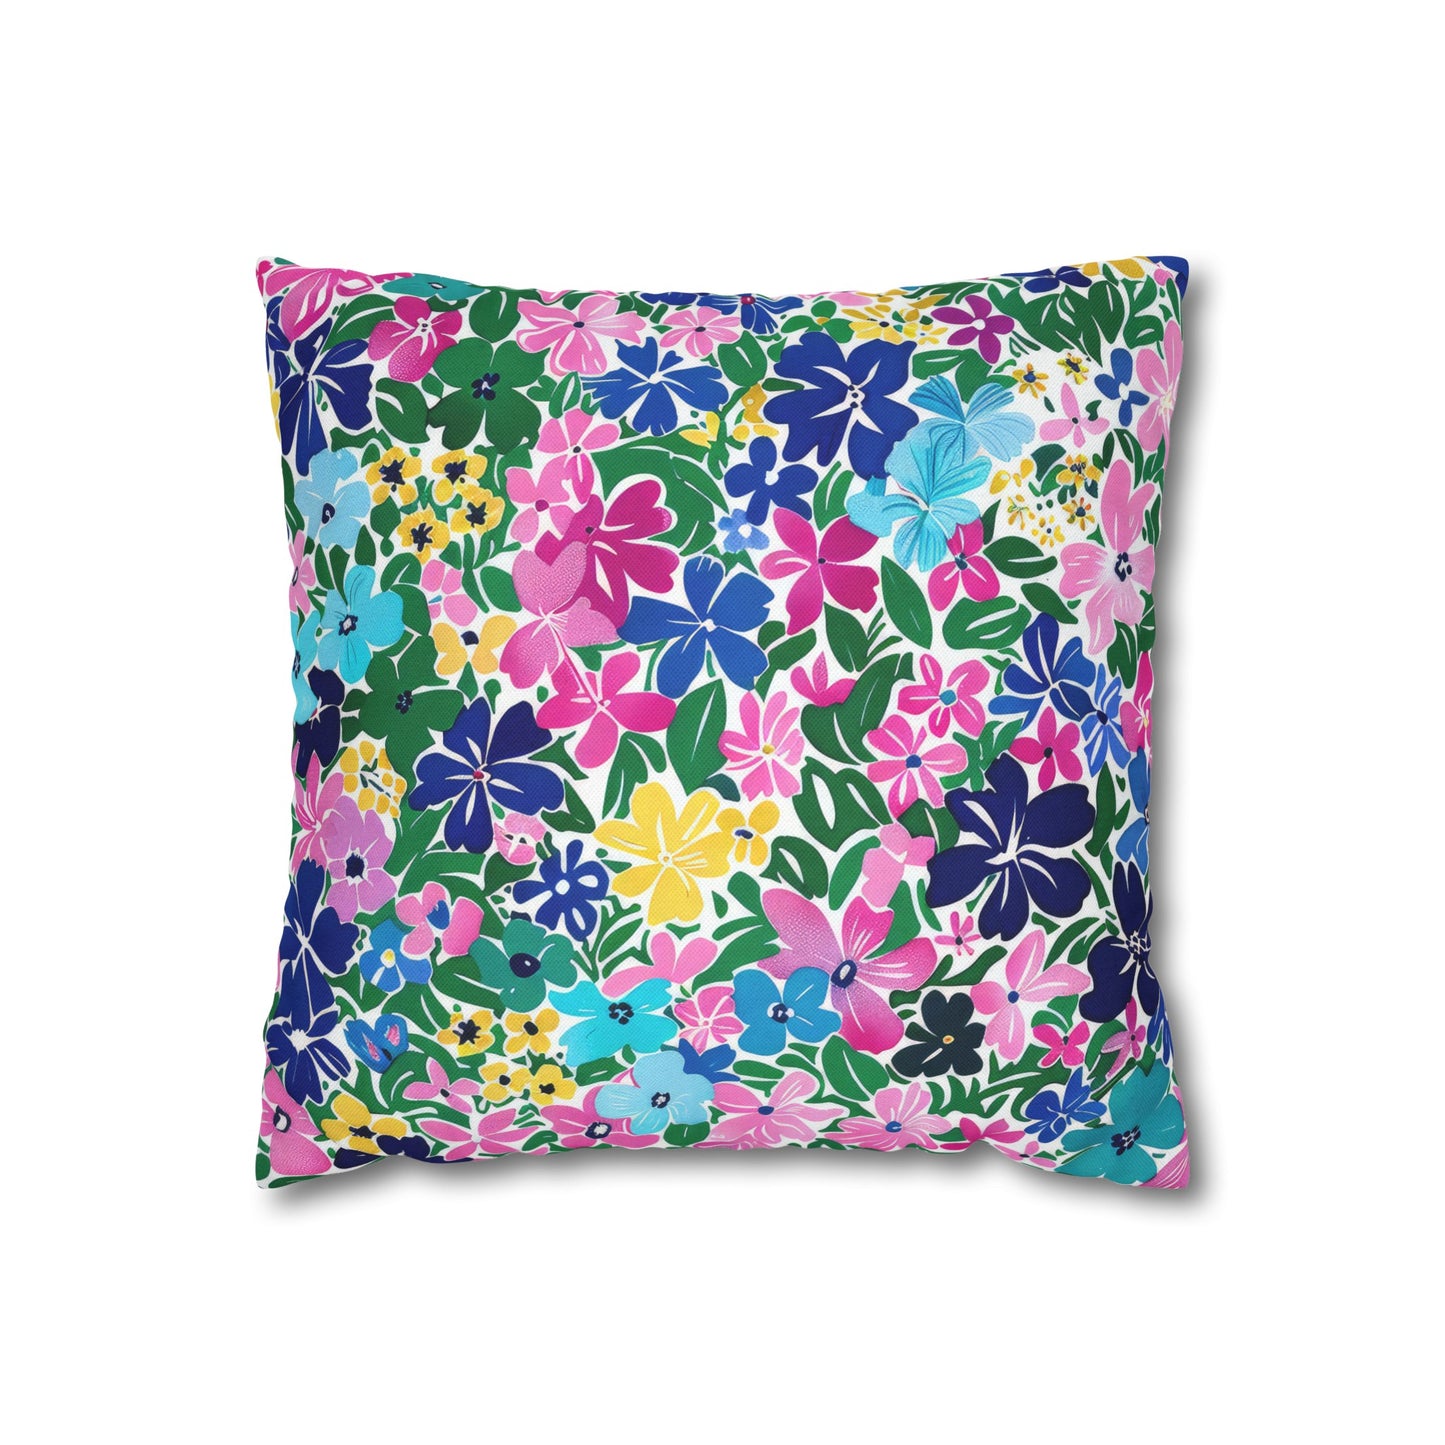 Rainbow Blooms: Vibrant Multi-color Watercolor Flowers in Full Bloom Spun Polyester Square Pillowcase 4 Sizes